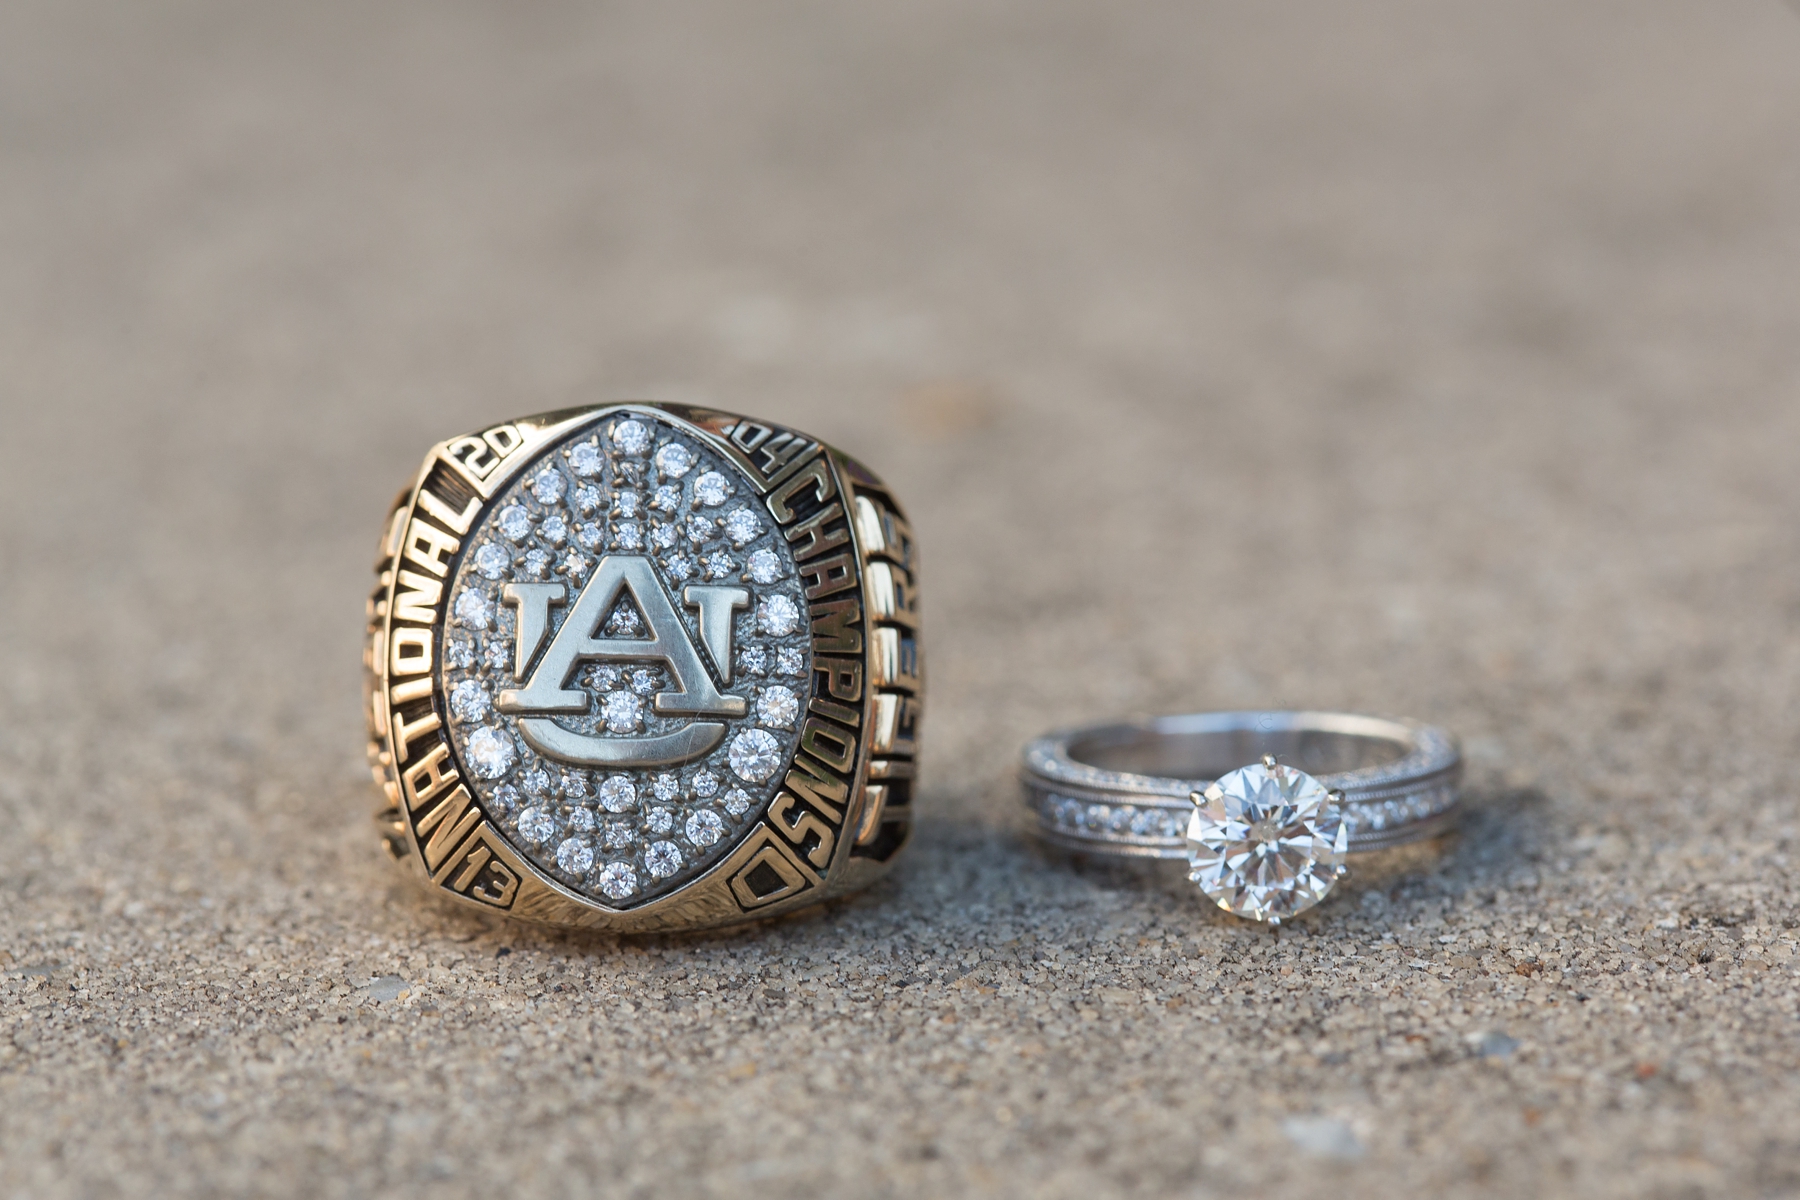 Creative ring shot with Auburn championship by Elle Danielle Photography